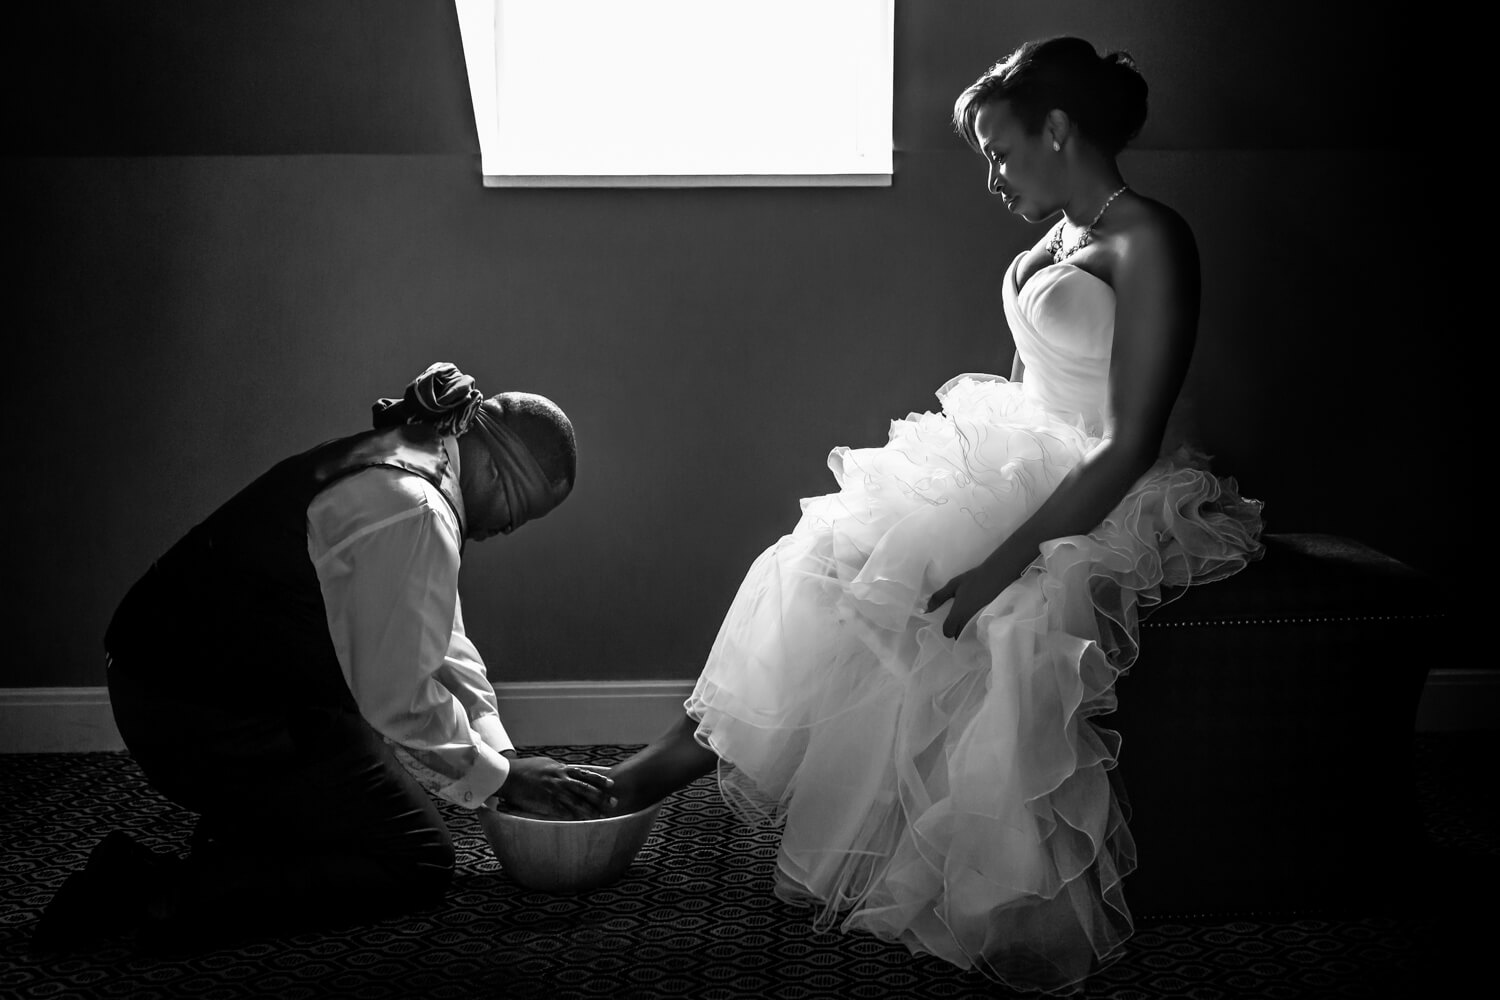 The groom did not want to see his bride prior to the ceremony hence why he was blindfolded, he did want to do a Biblical ritual and wash her feet, this is a dramatic black and white photo and you have profiles of the bride and groom, the bride is on a chair and the groom is on his knees washing her feet, black couple, Procopio Photography, best top Washington DC photographer, best top Maryland photographer, best top Virginia photographer, best top DMV photographer, best top wedding photographer, best top commercial photographer, best top portrait photographer, best top boudoir photographer, modern fine art portraits, dramatic, unique, different, bold, editorial, photojournalism, award winning photographer, published photographer, memorable images, be different, stand out